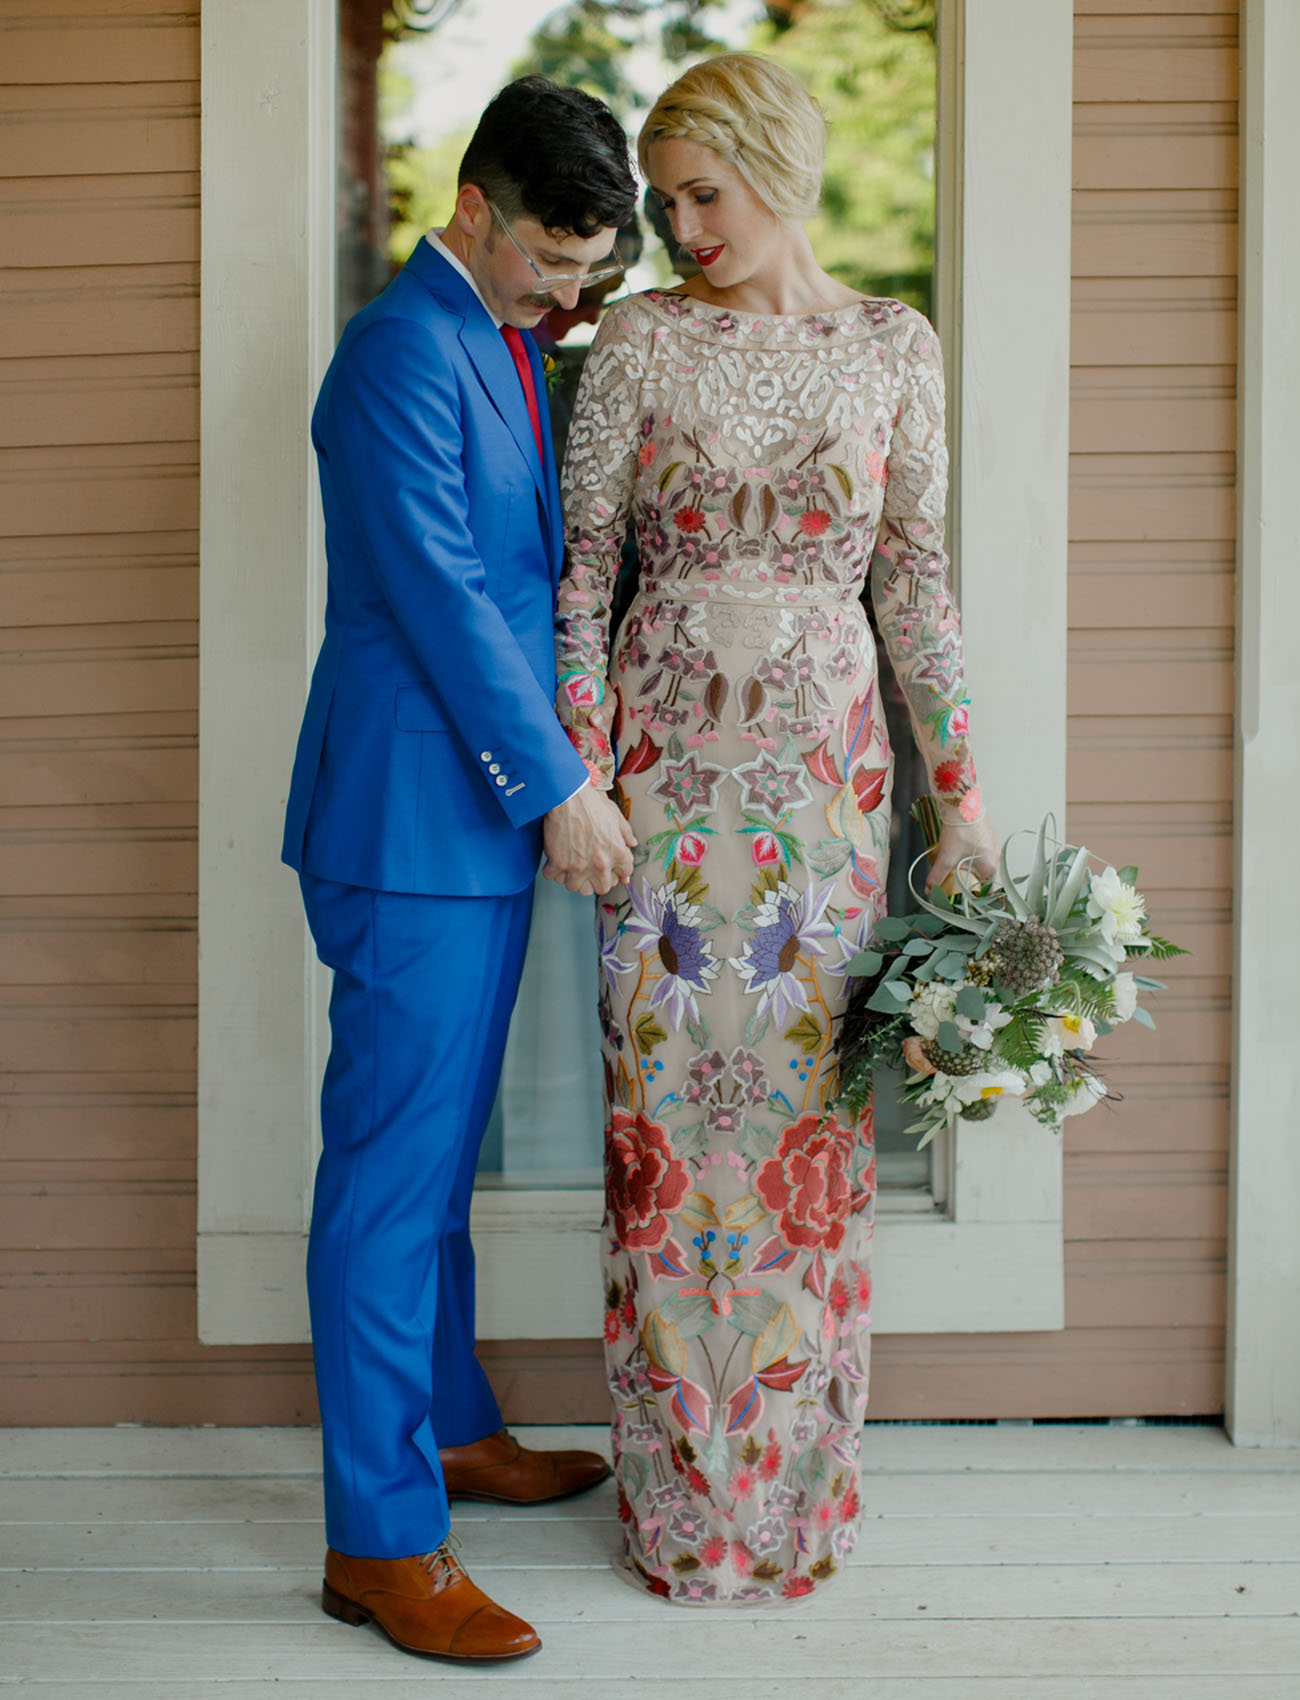 Picture Of Playful And Colorful Wedding In Texas 8